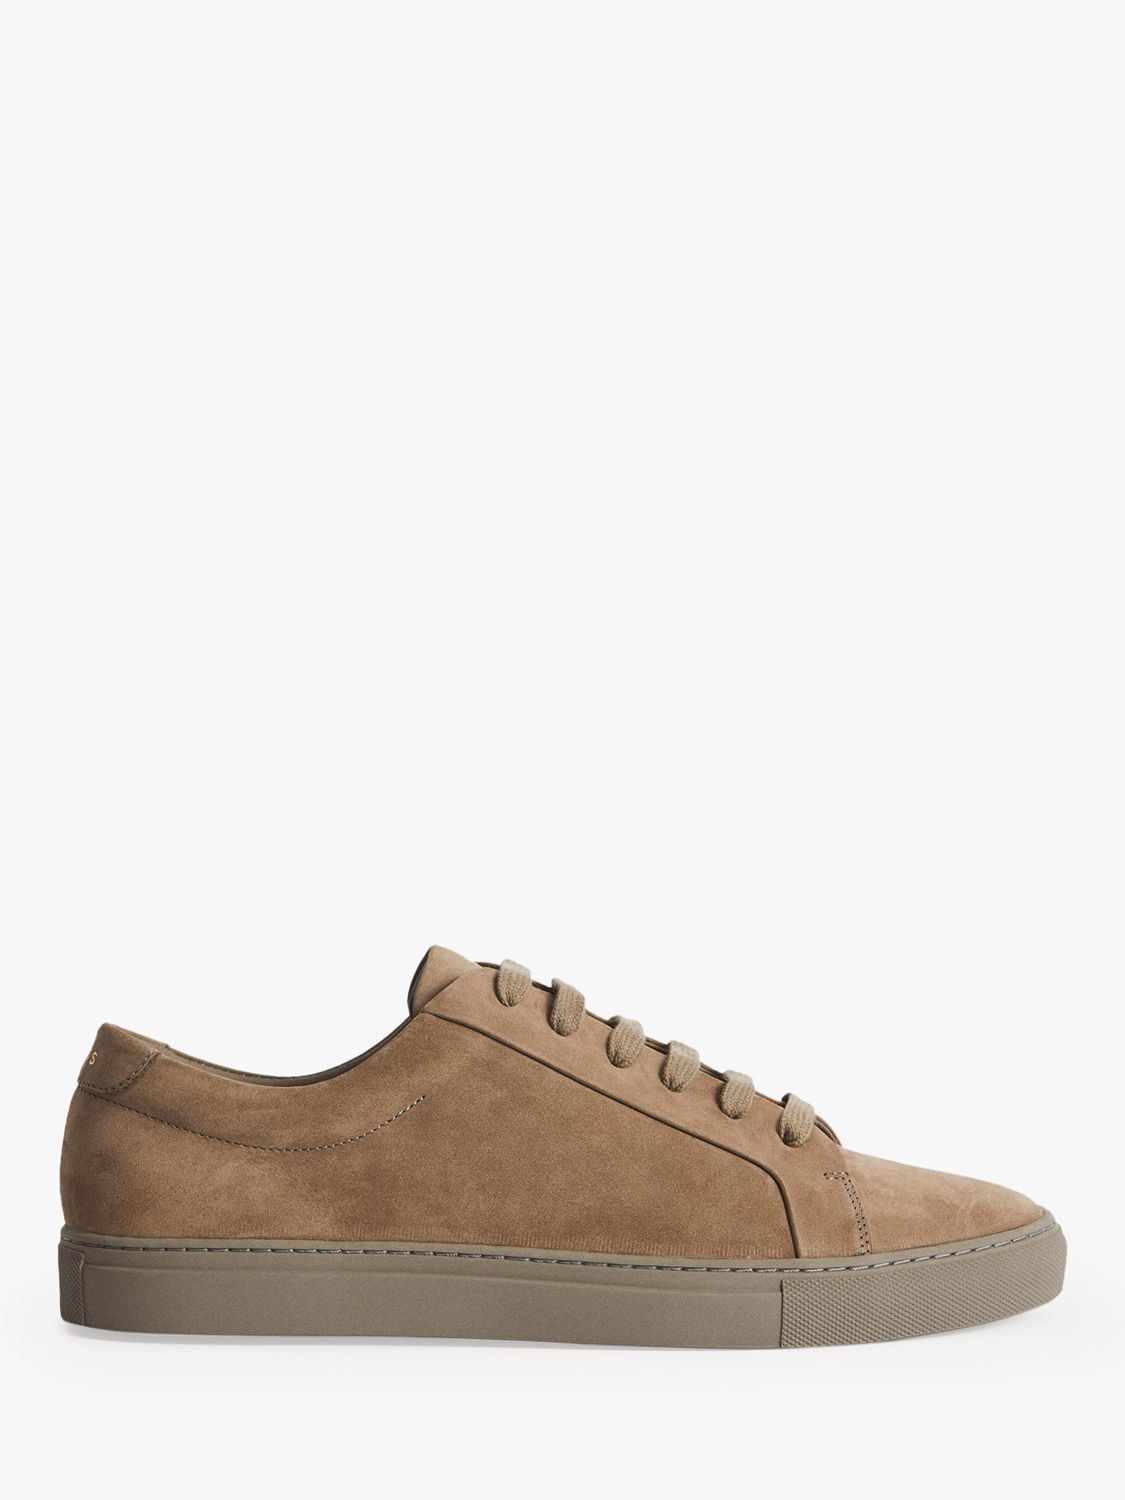 Reiss Luca Nubuck Leather Trainers, Taupe at John Lewis & Partners